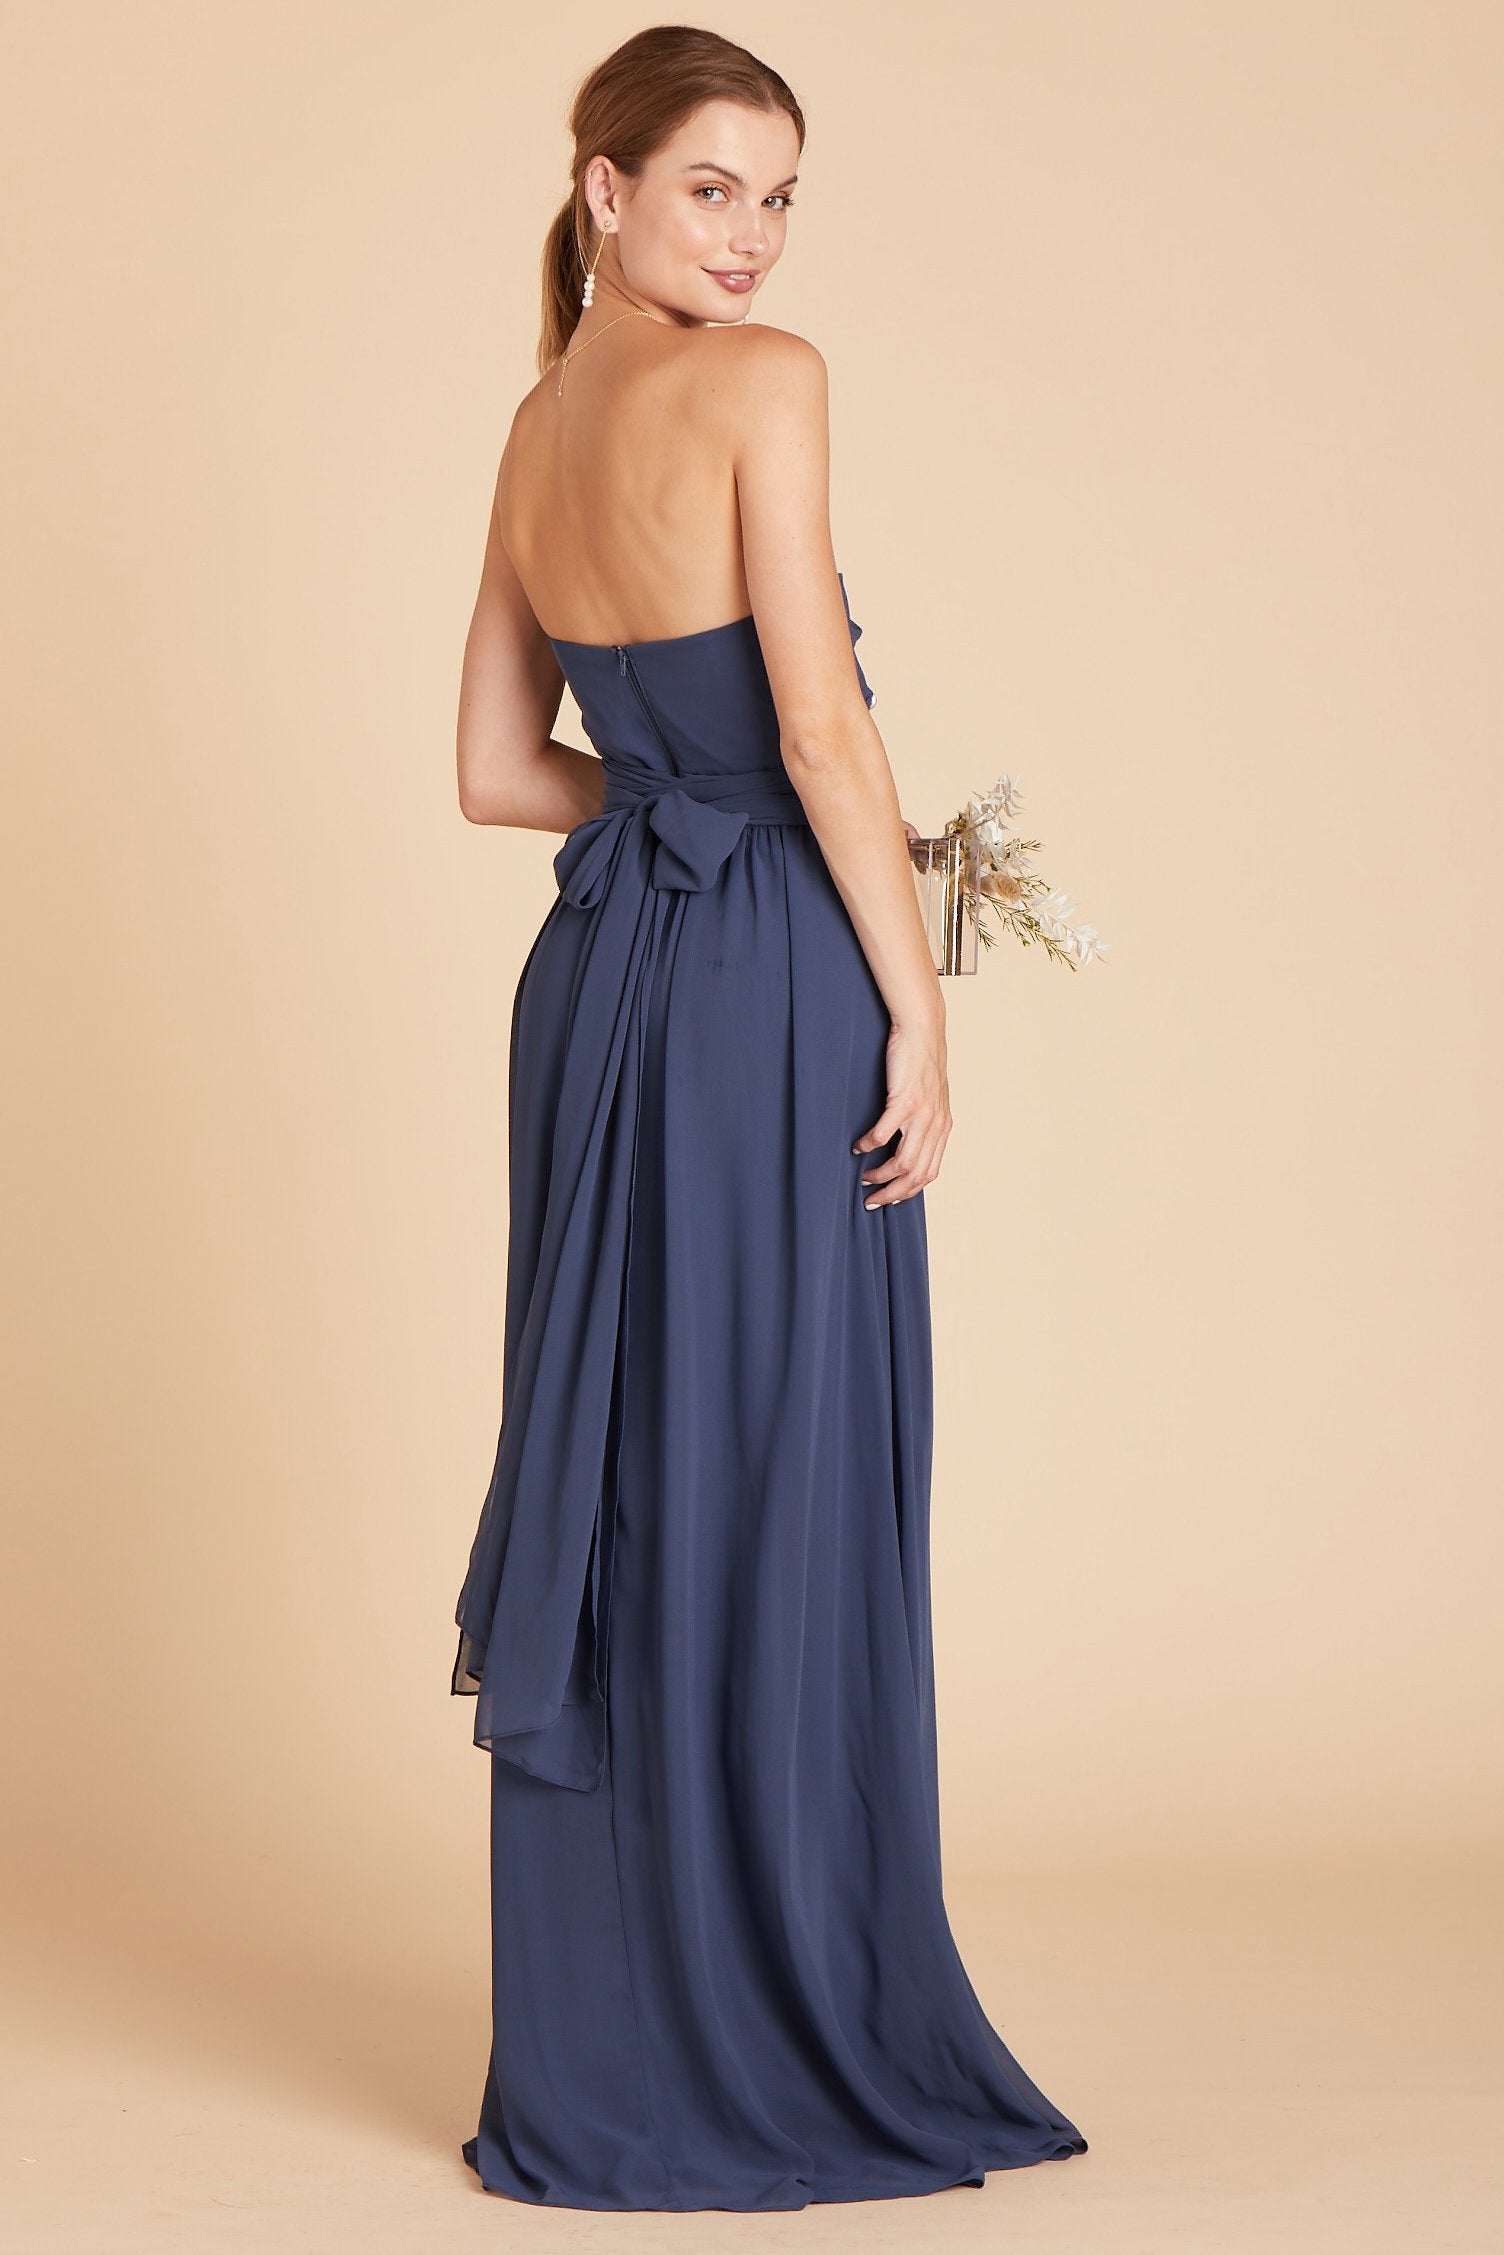 Grace convertible bridesmaid dress in slate blue chiffon by Birdy Grey, side view